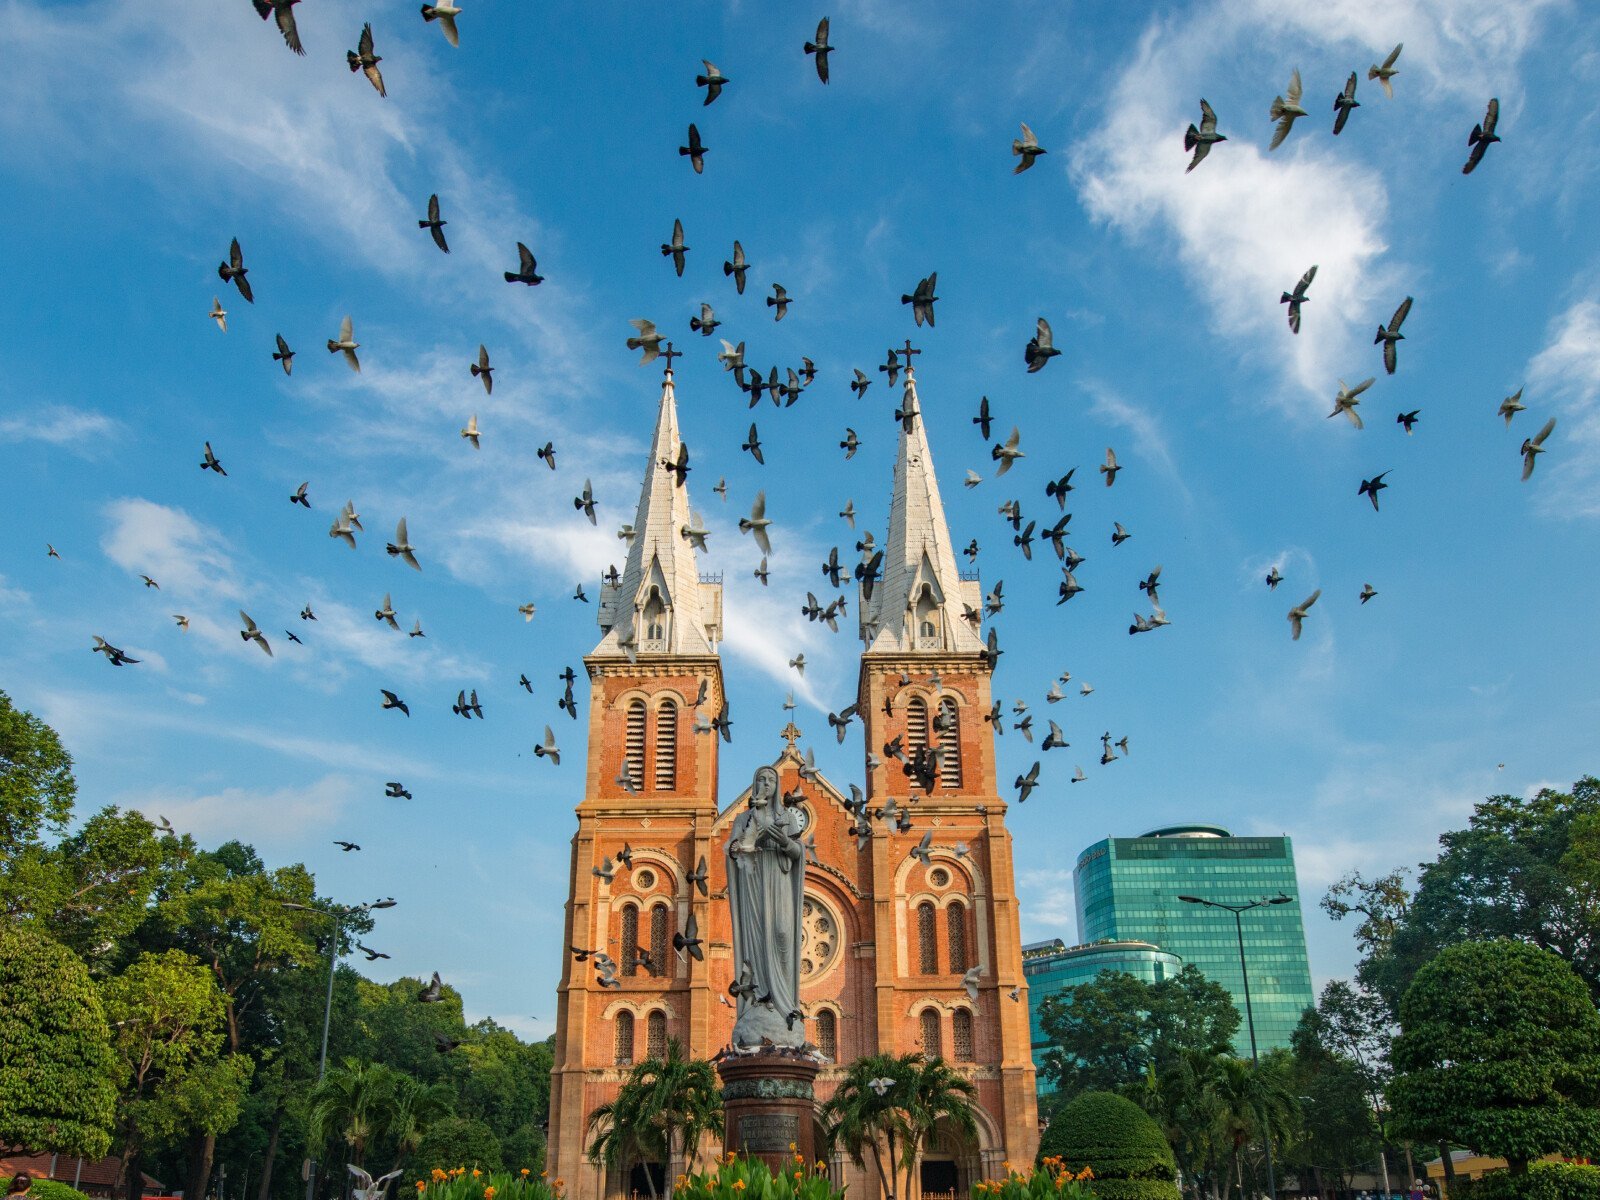 hcm city tour notre 2 - Things To Do In Ho Chi Minh City